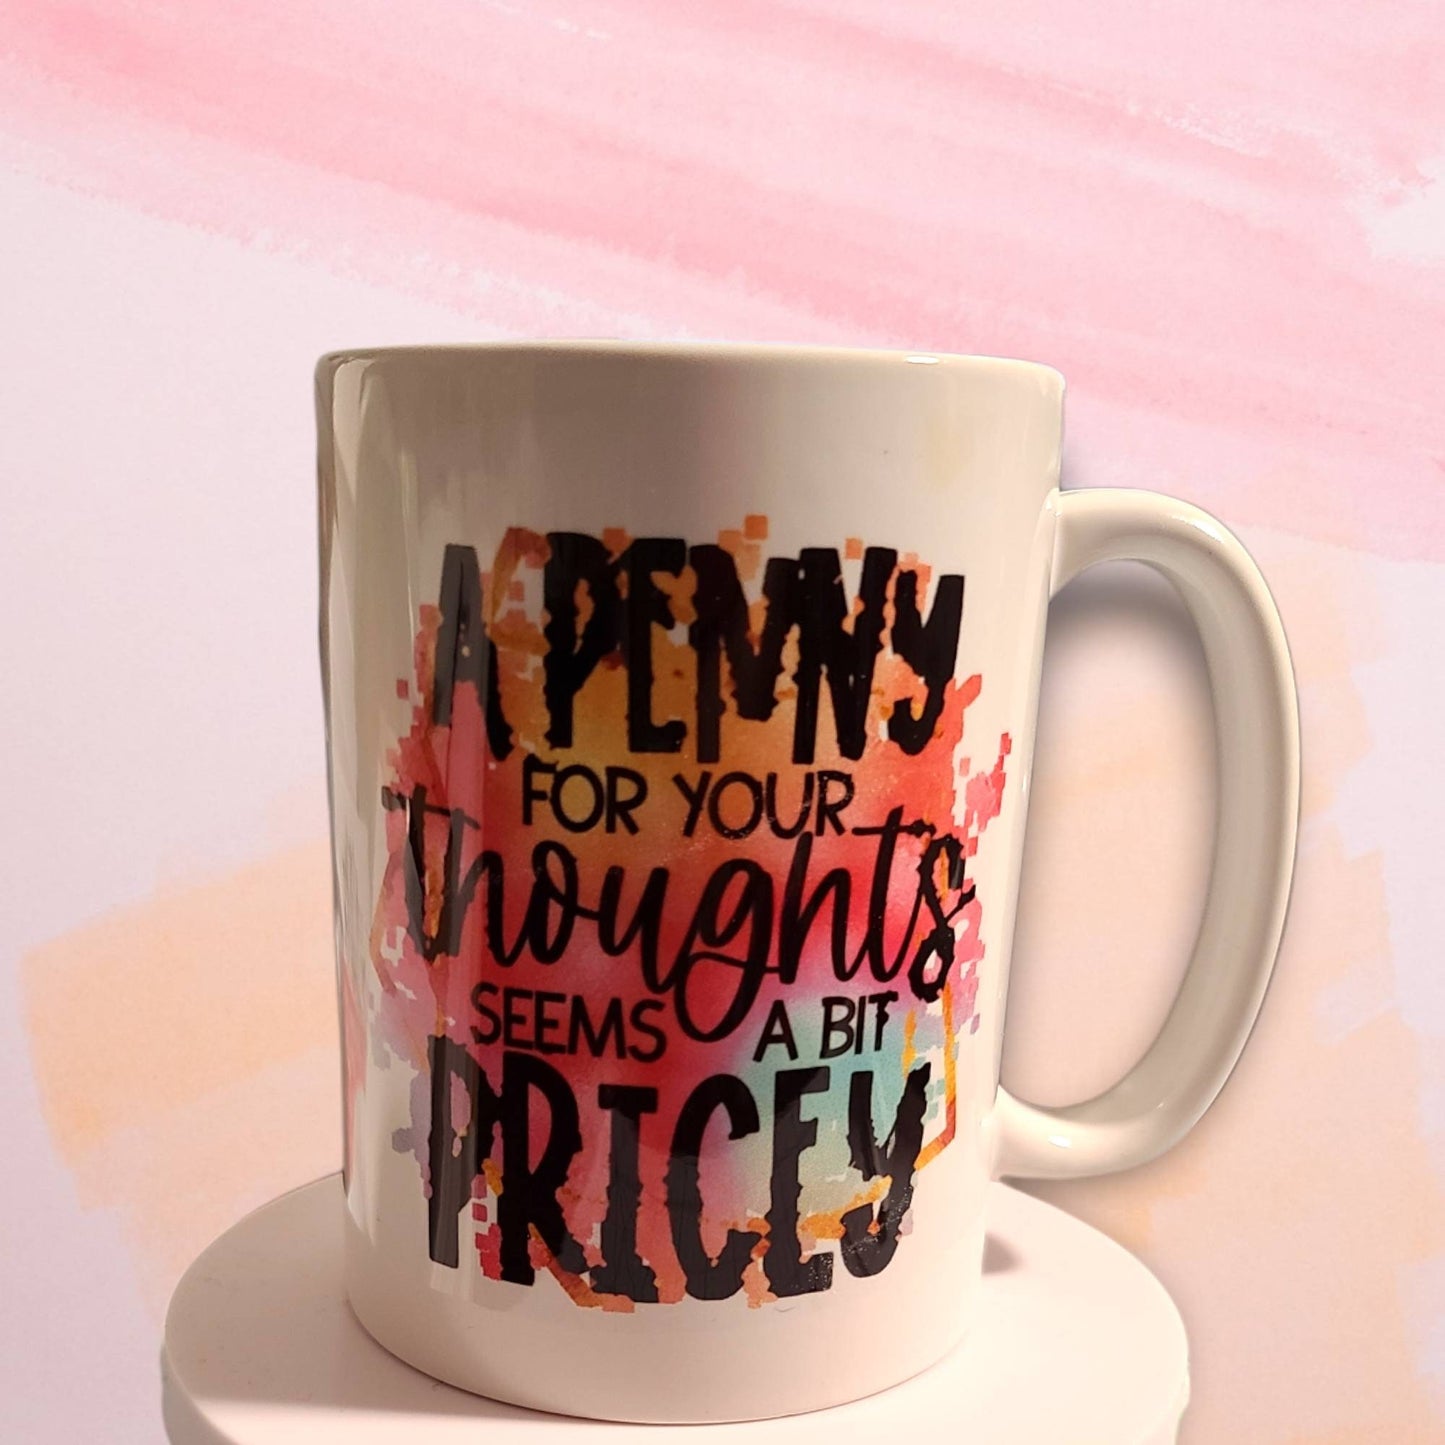 Coffee mug with funny saying. Coffee cup with personalization option. Cup with quote "A penny is priced too much." Funny drinkware gift.